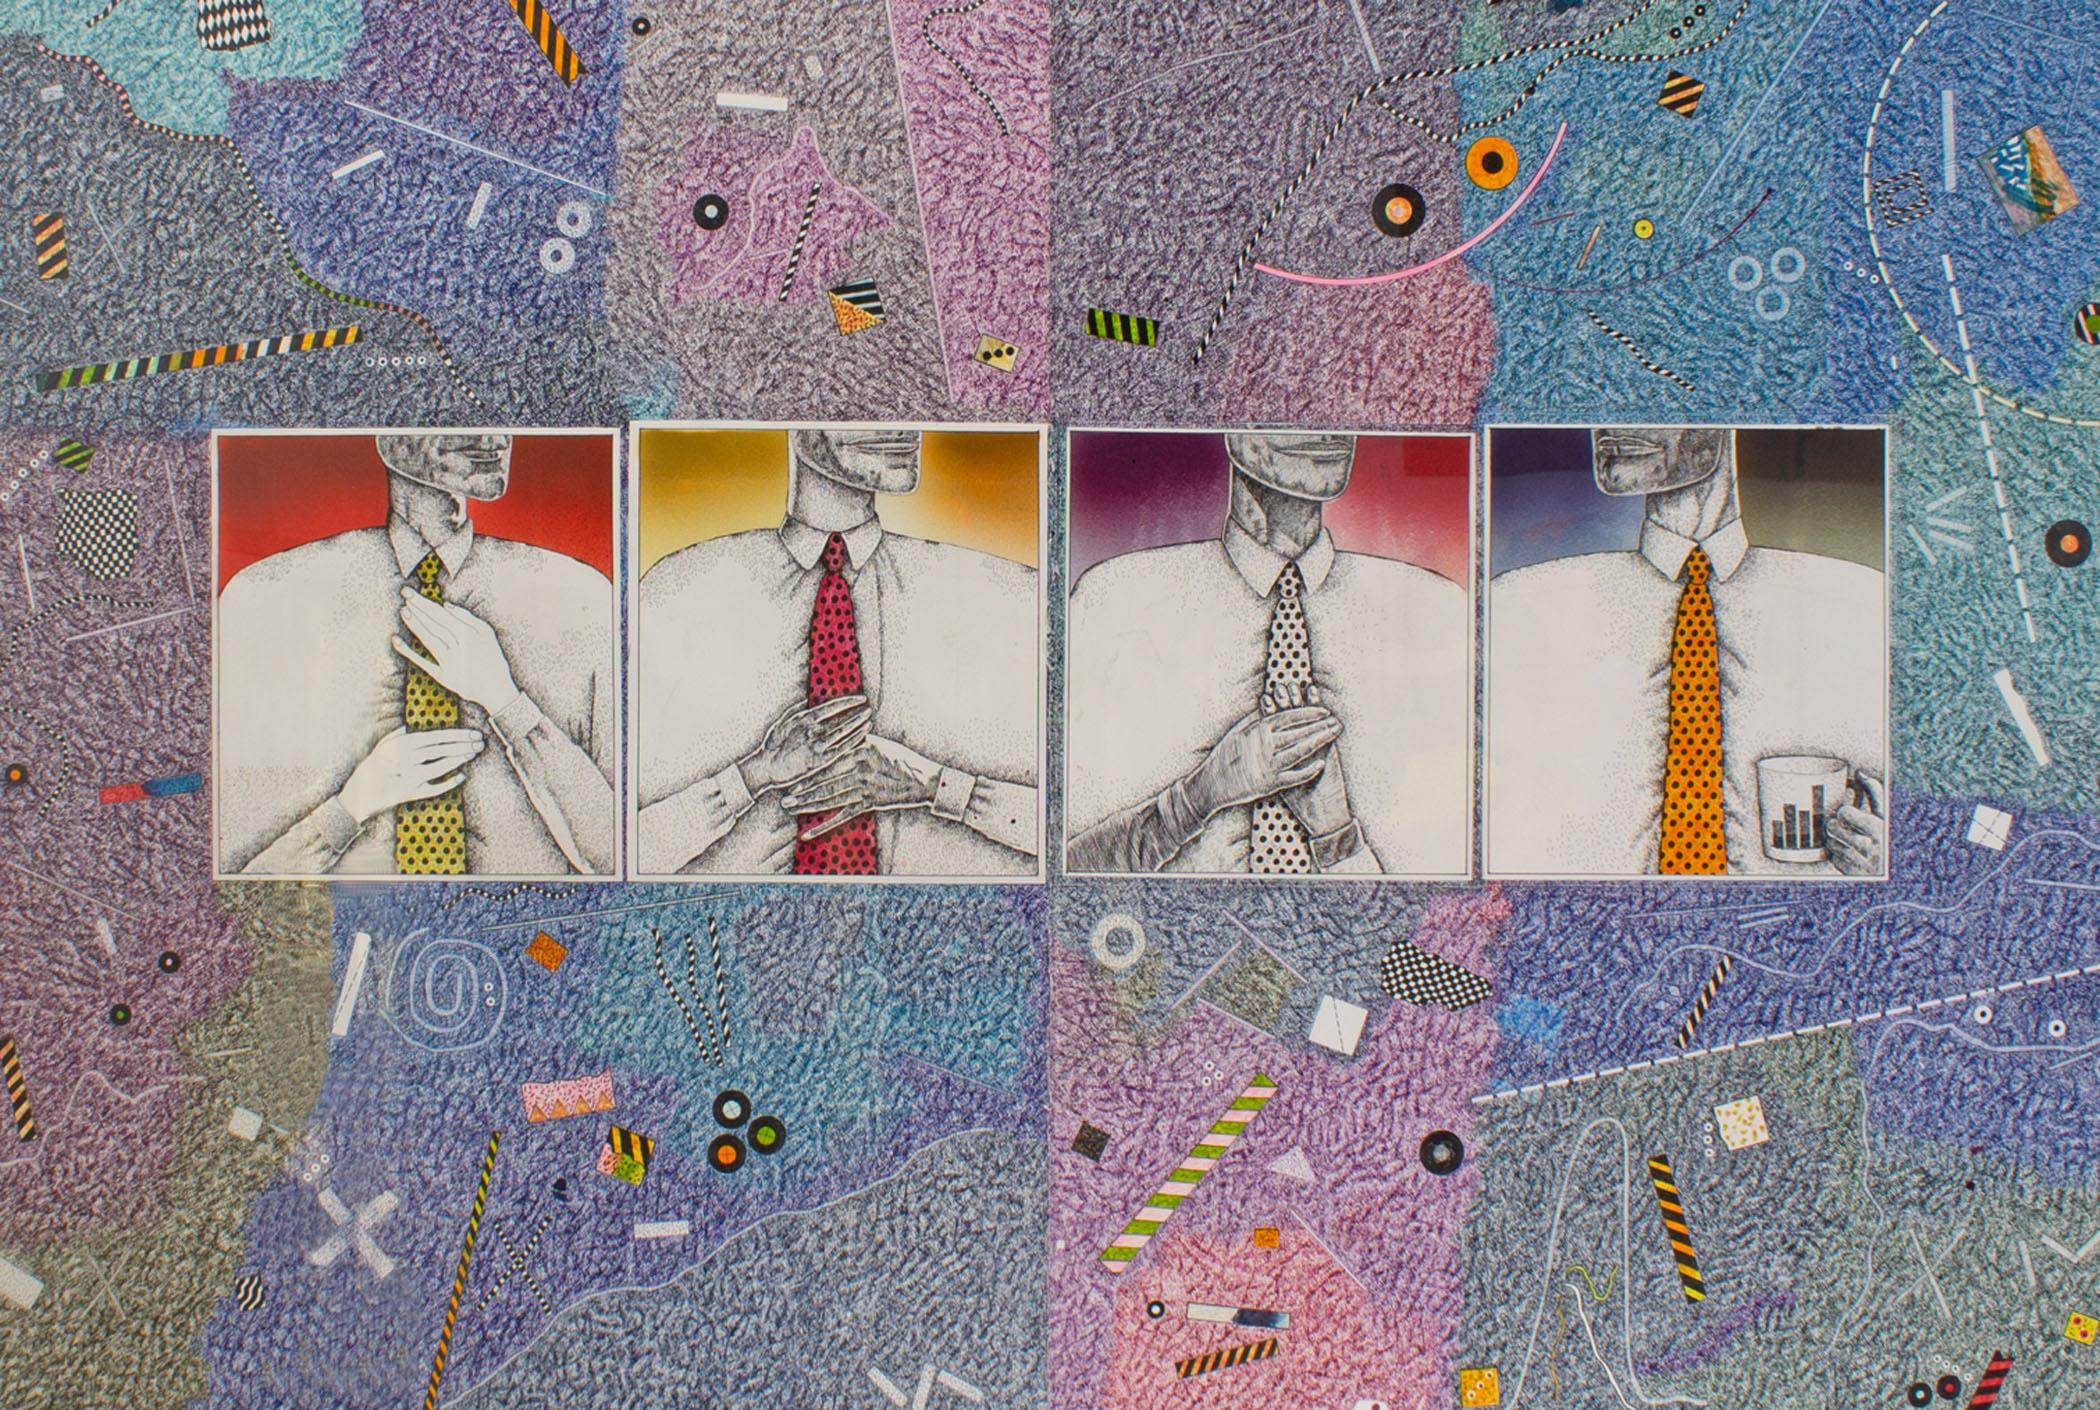 A collage and marker abstract drawing by the American artist Thom Shaw (1947-2010). Four squares depicting men in various stages of putting on a tie are collaged onto the intricately drawn background. The background of the collage pieces are printed